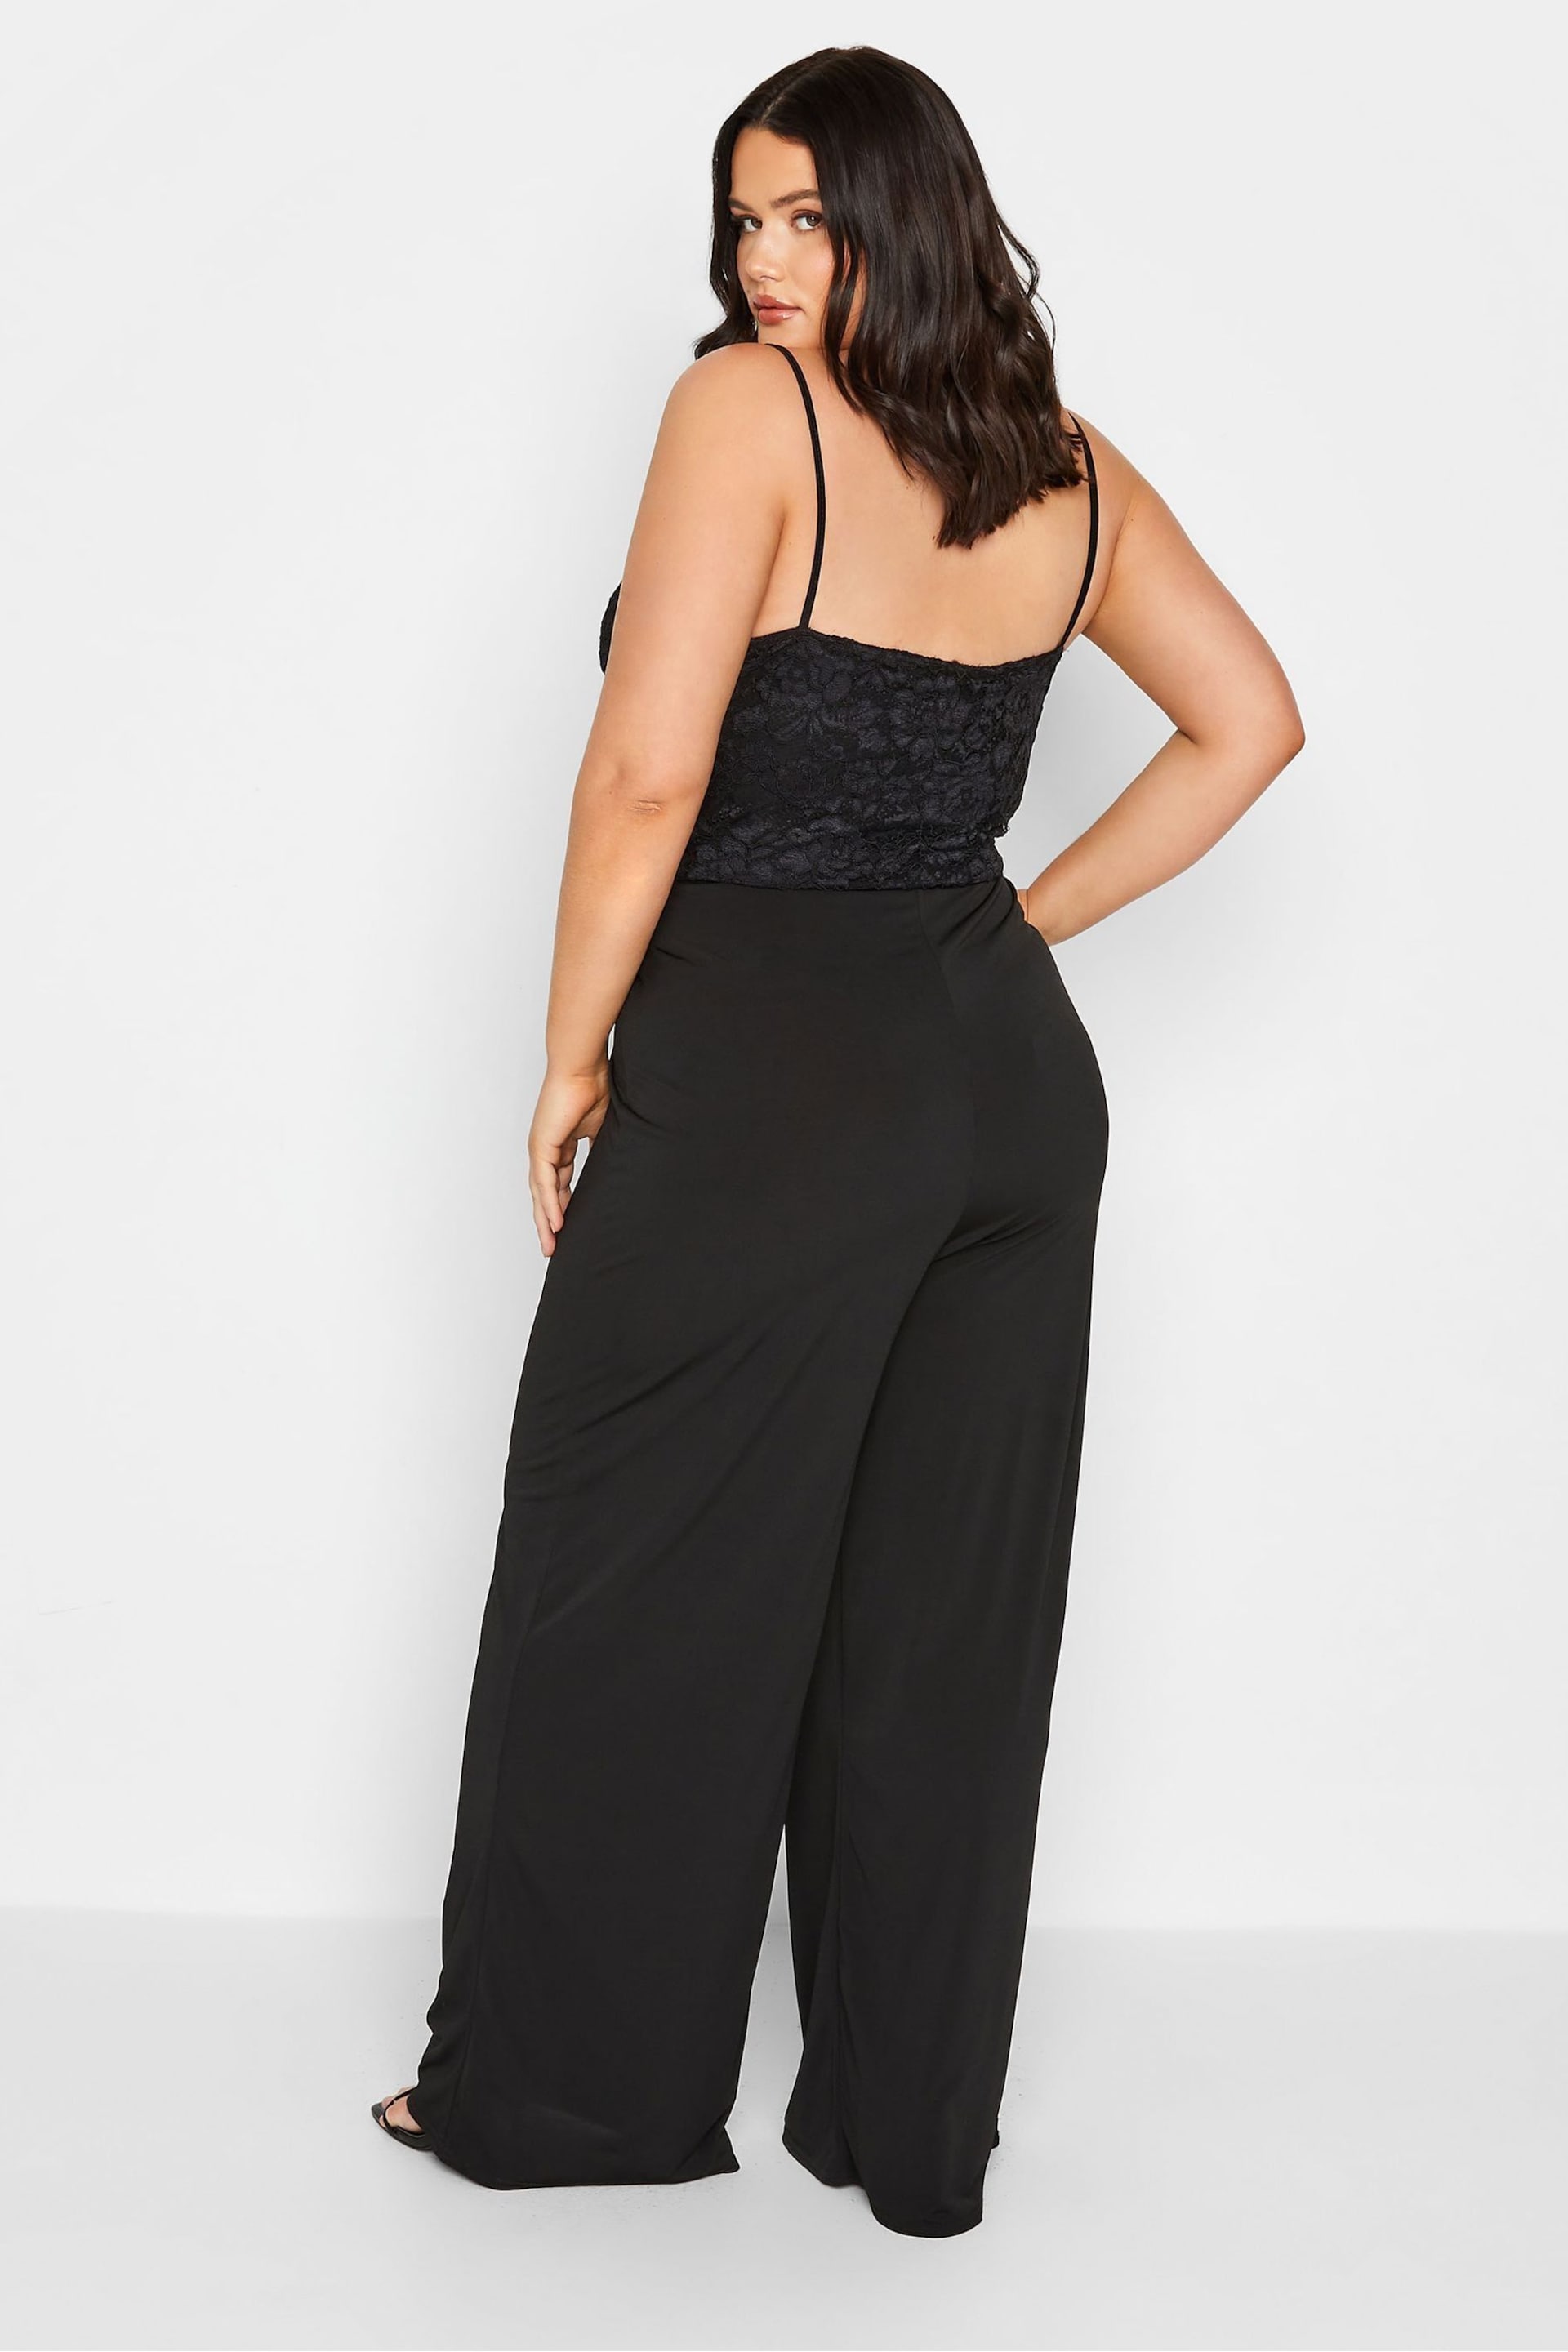 Long Tall Sally Black Lace Cami Stretch Jumpsuit - Image 2 of 4